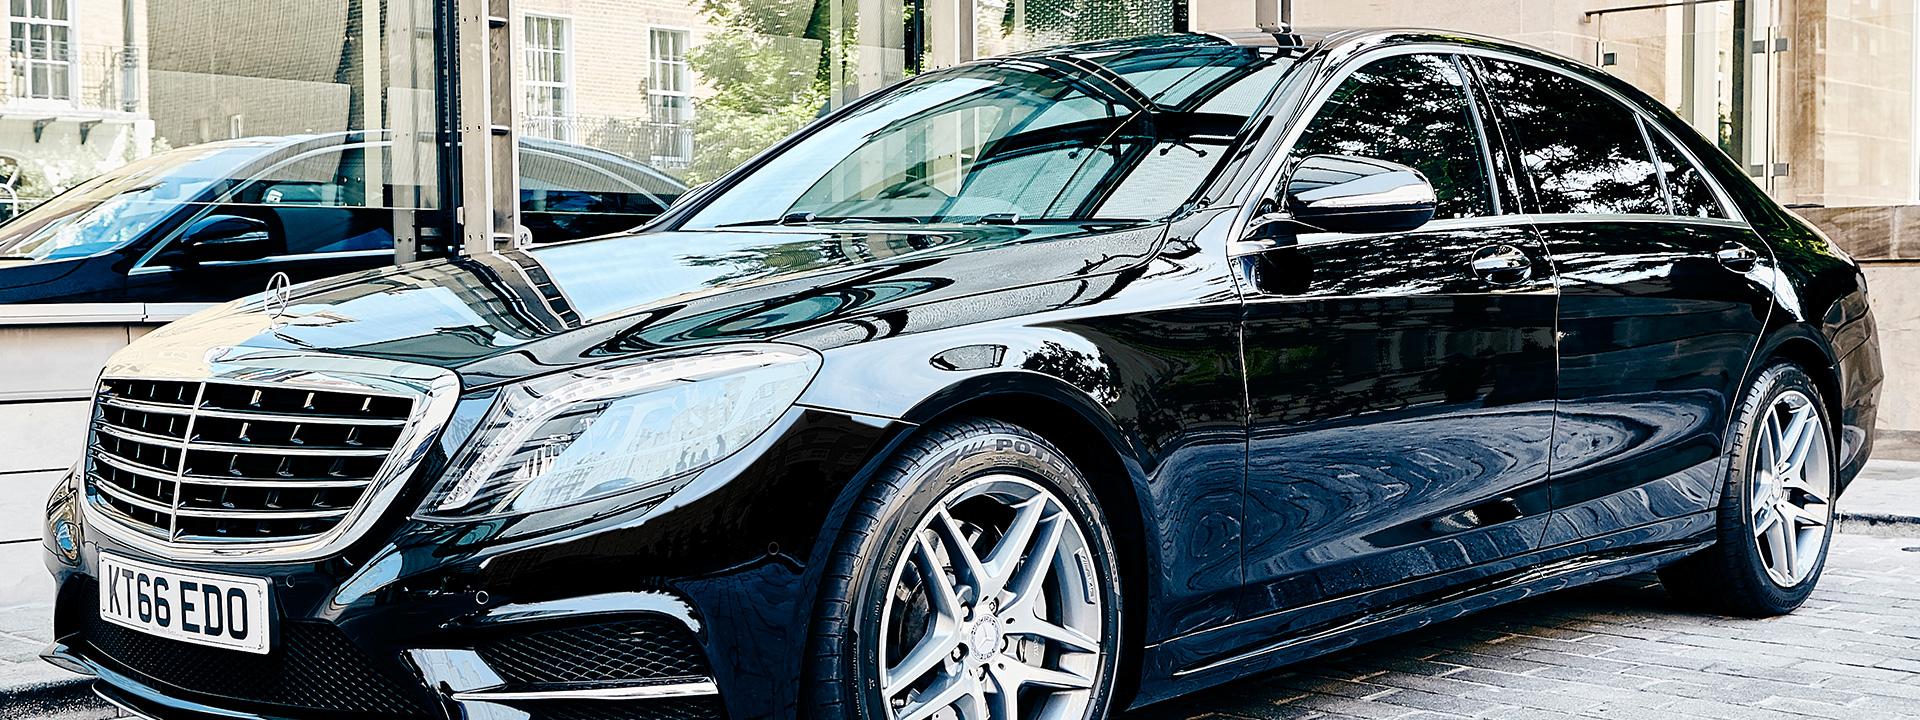 At The Berkeley, hotel guests also have a private chauffeur service in a Mercedes, for all their needs.